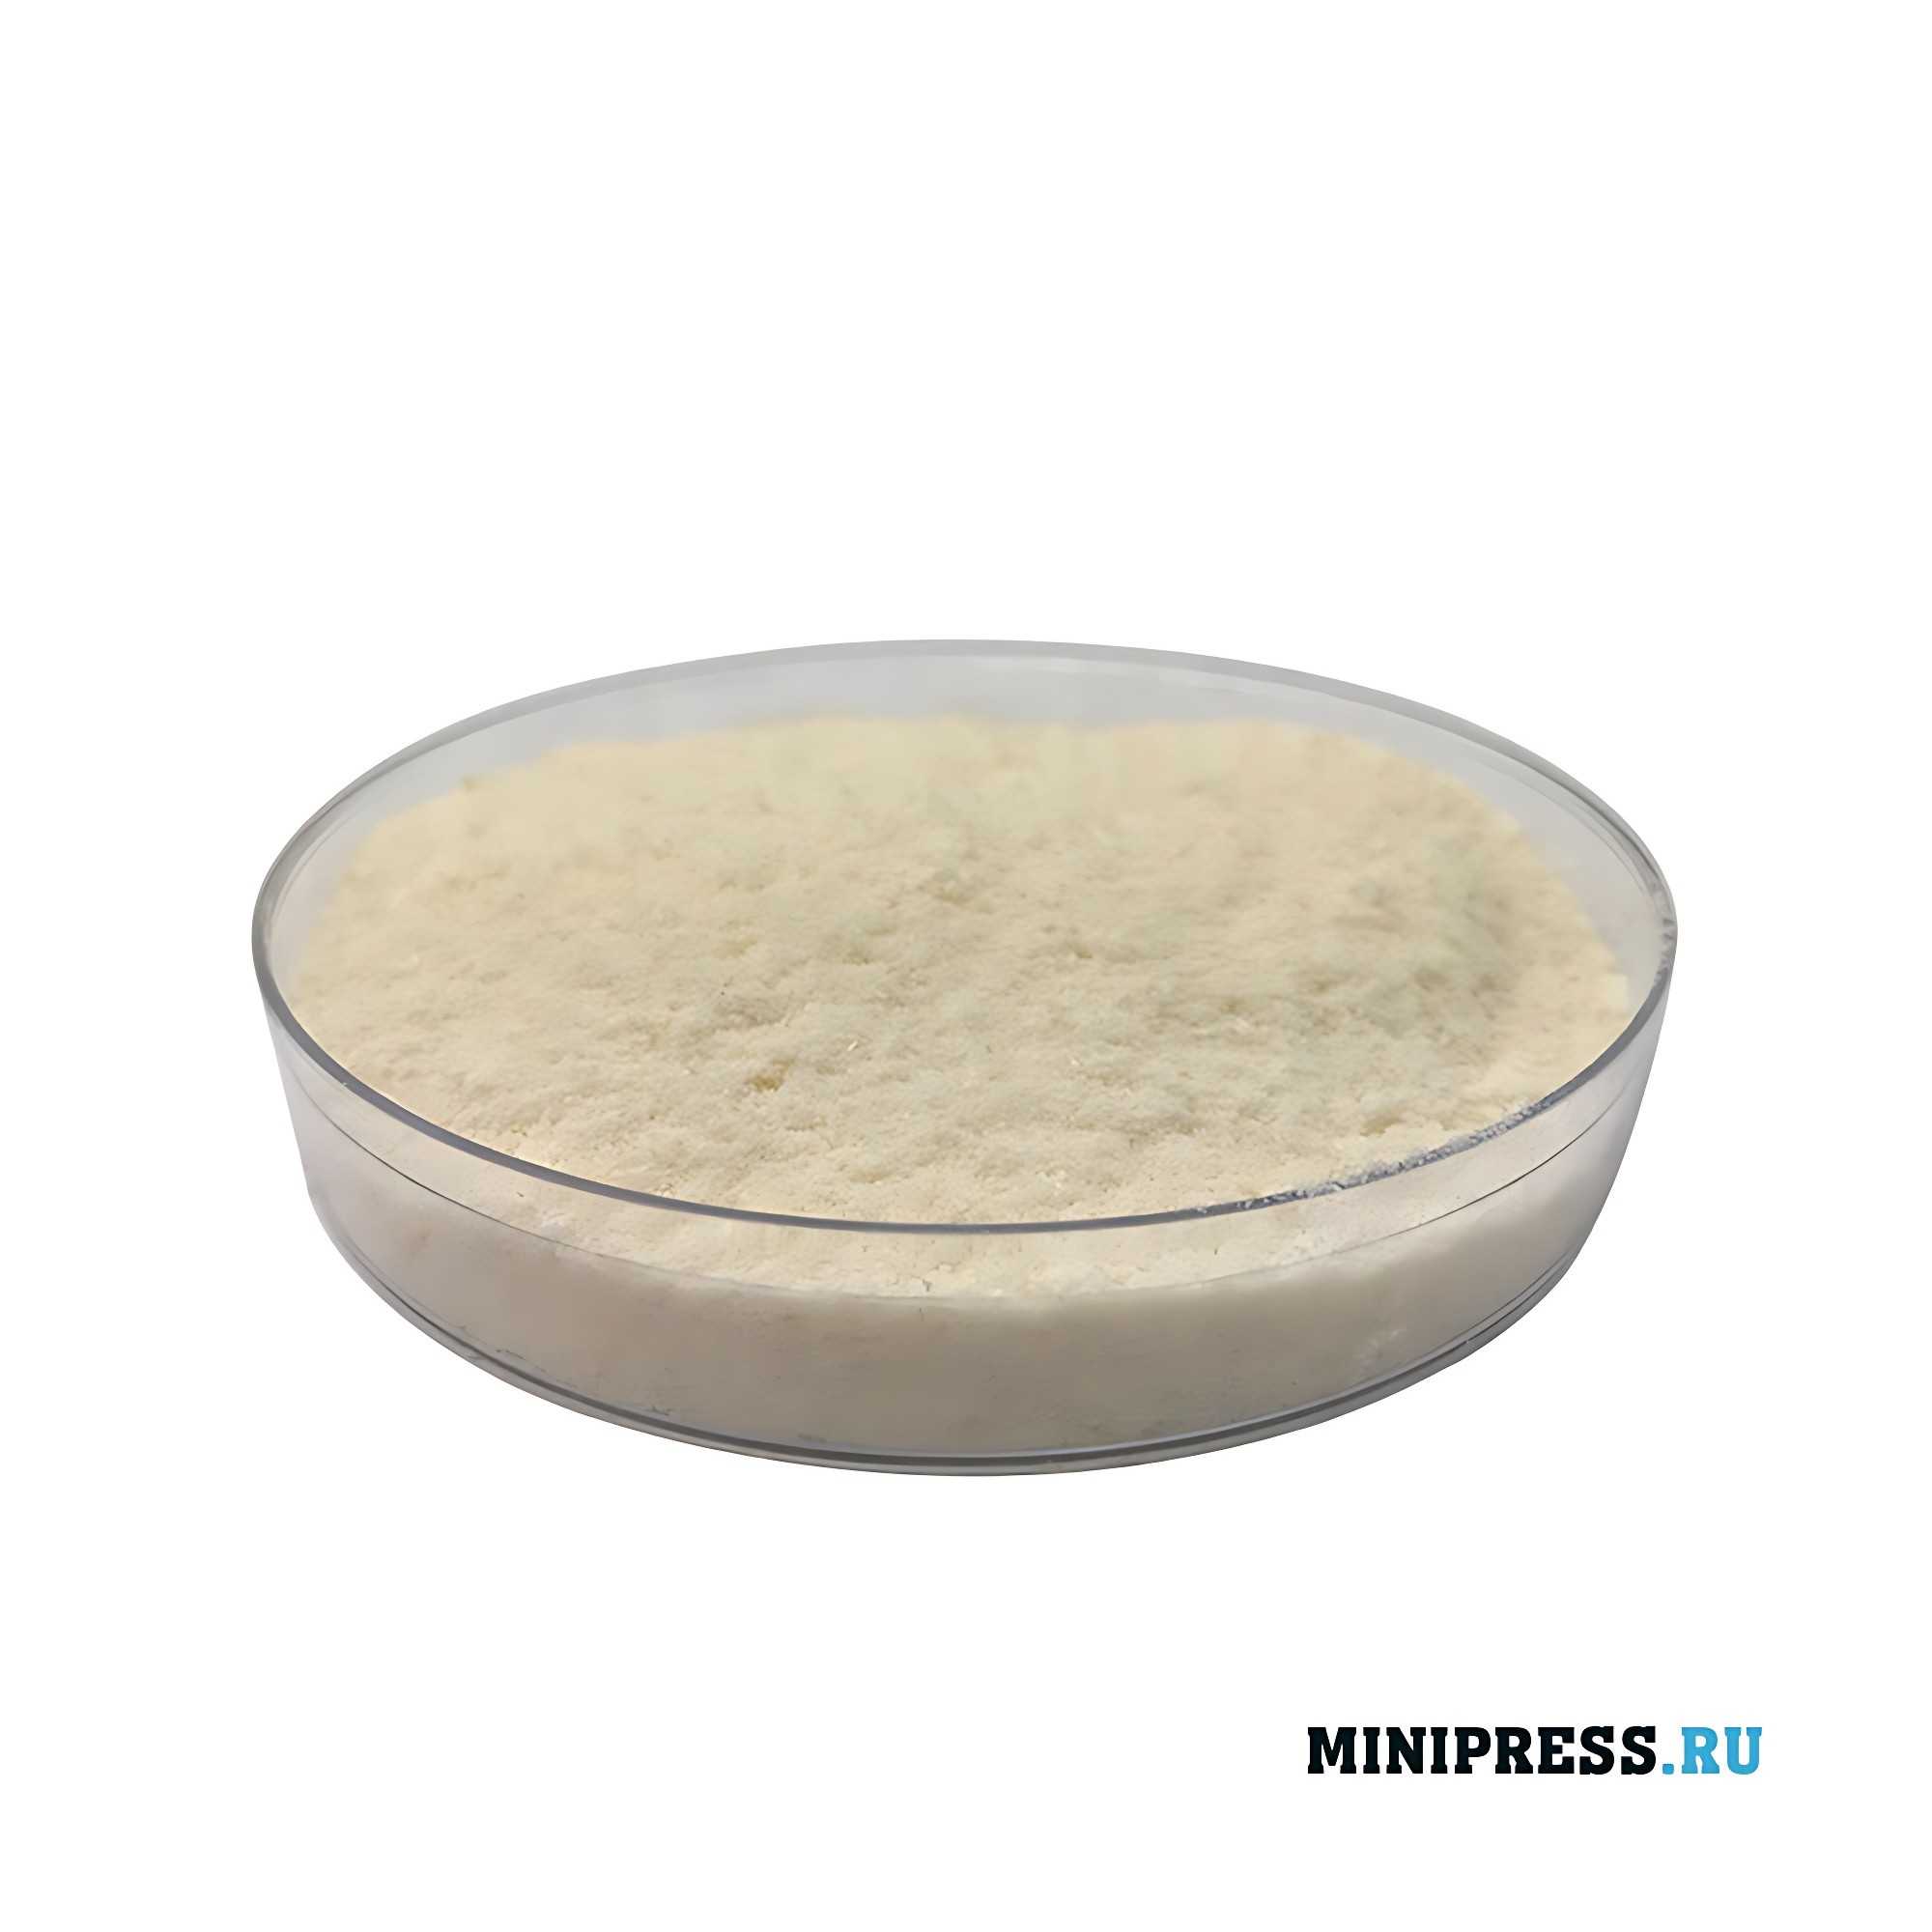 Powders for the manufacture of tablets